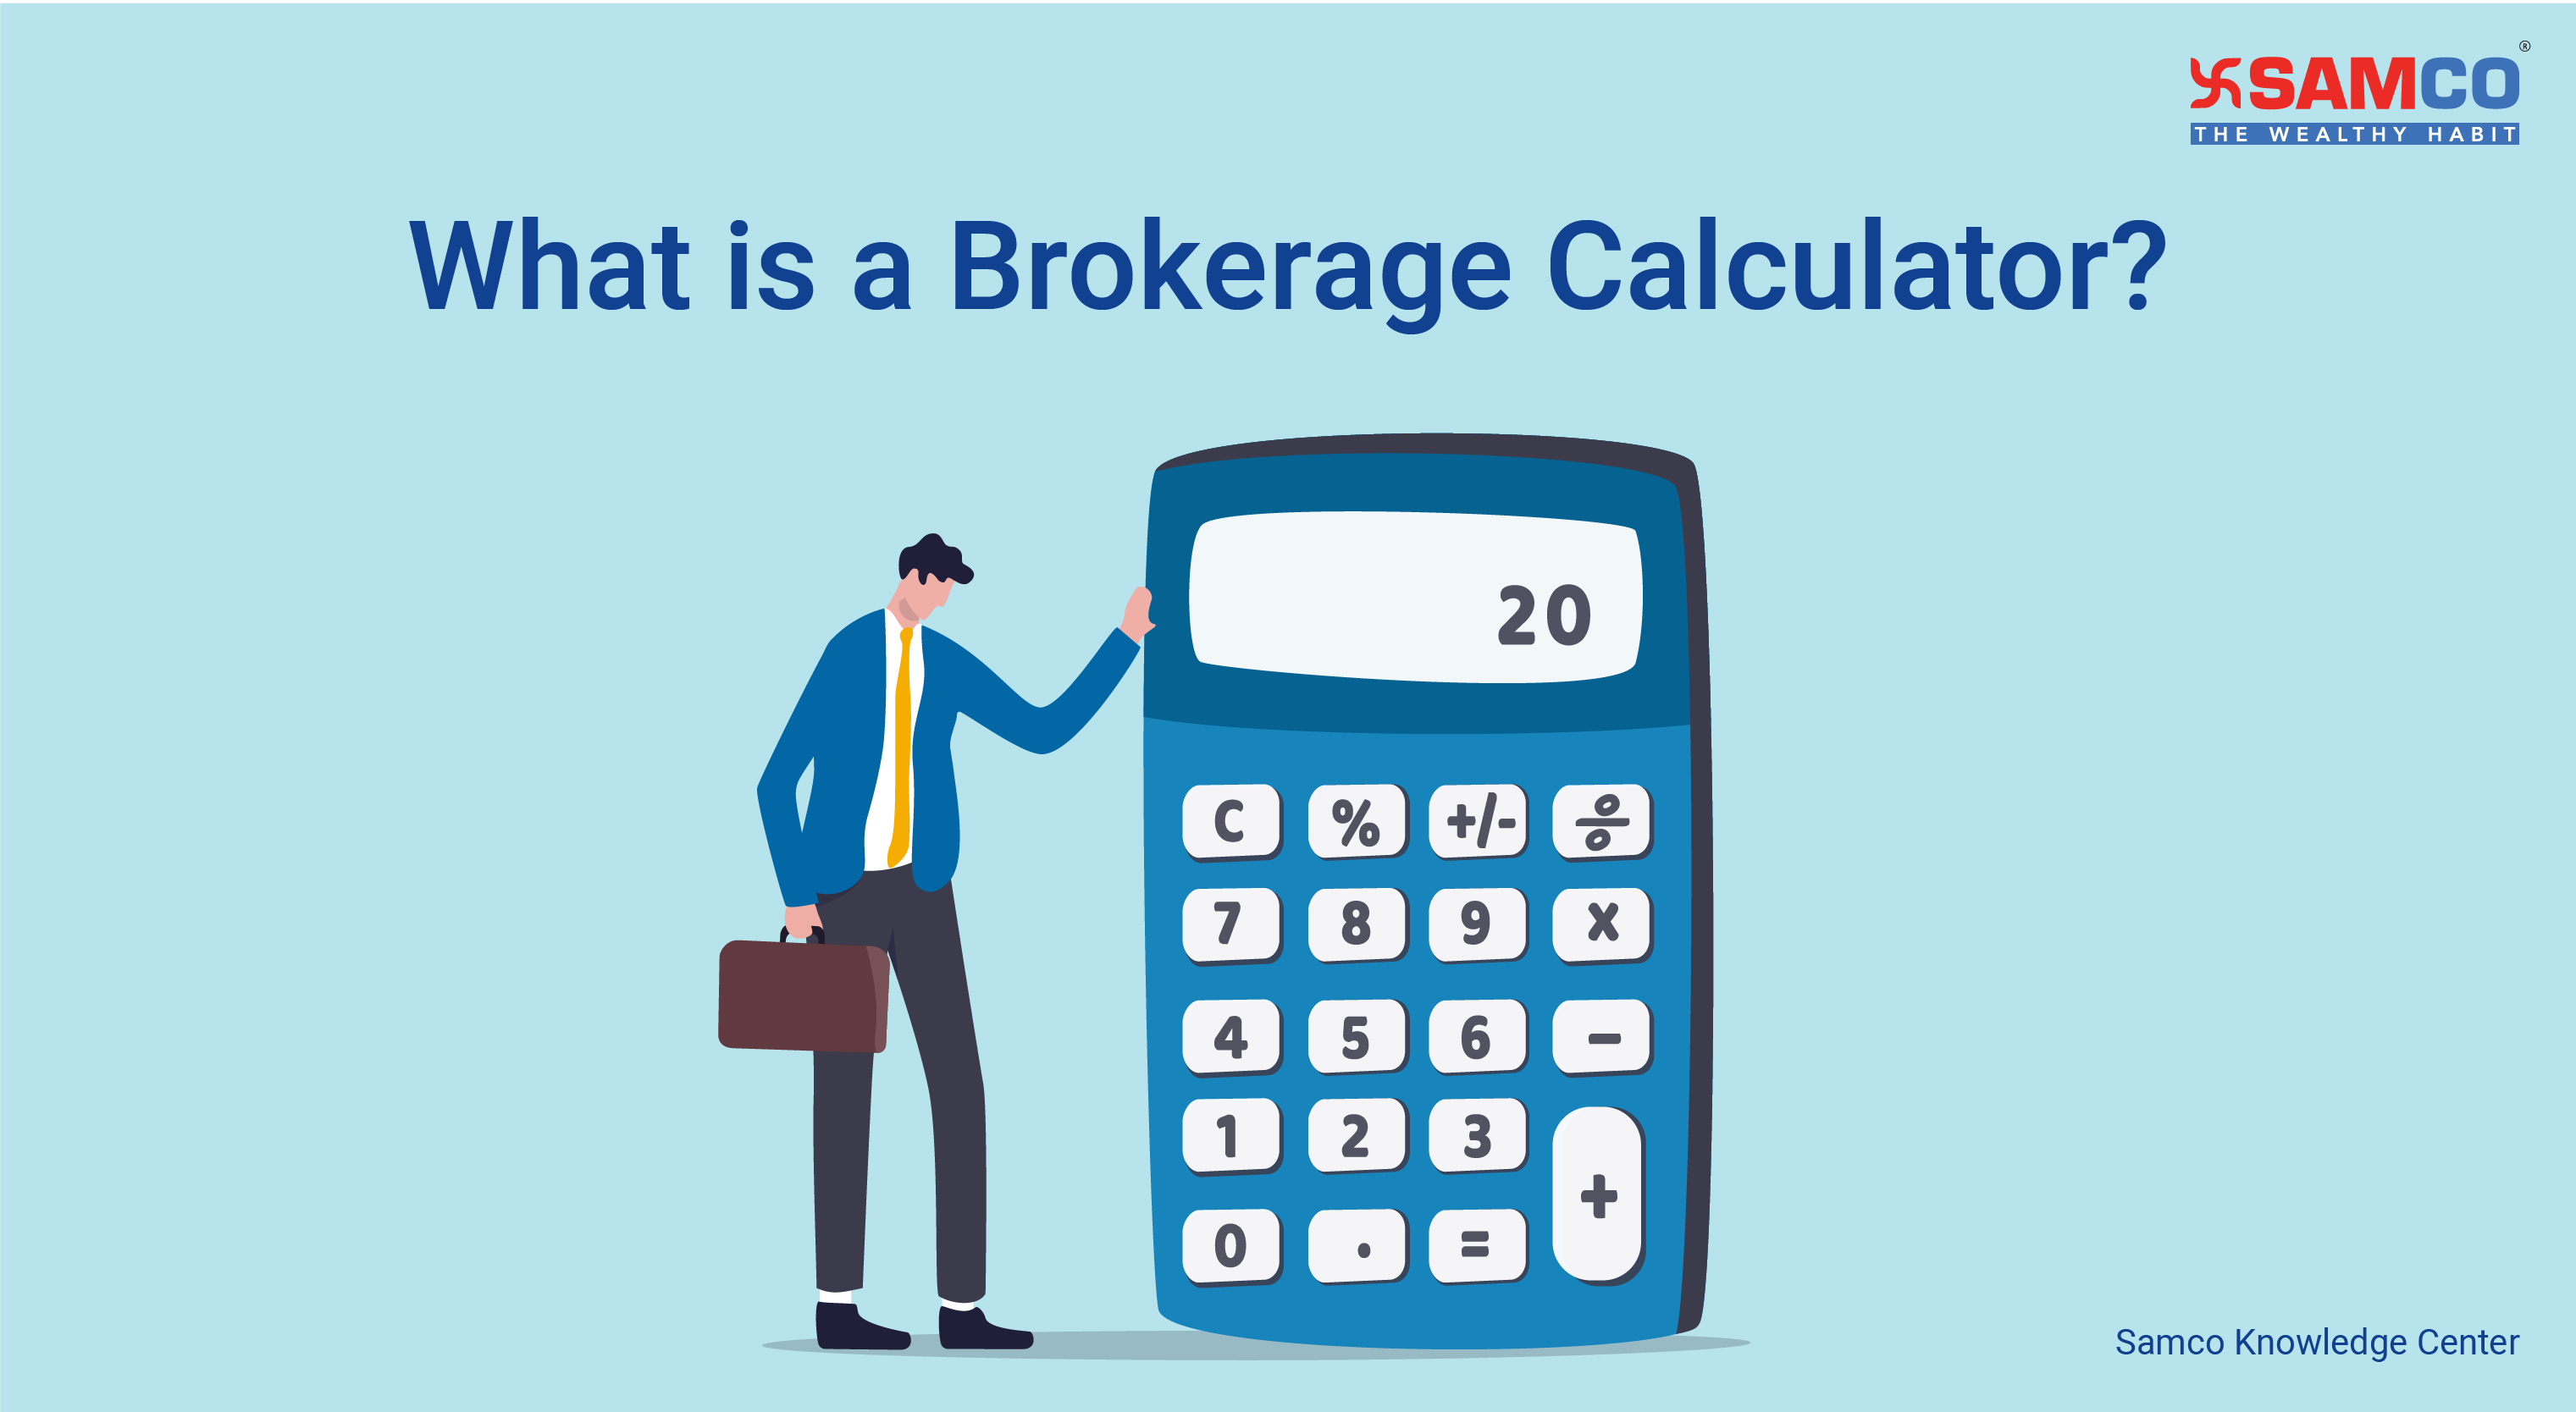 What is a Brokerage Calculator?